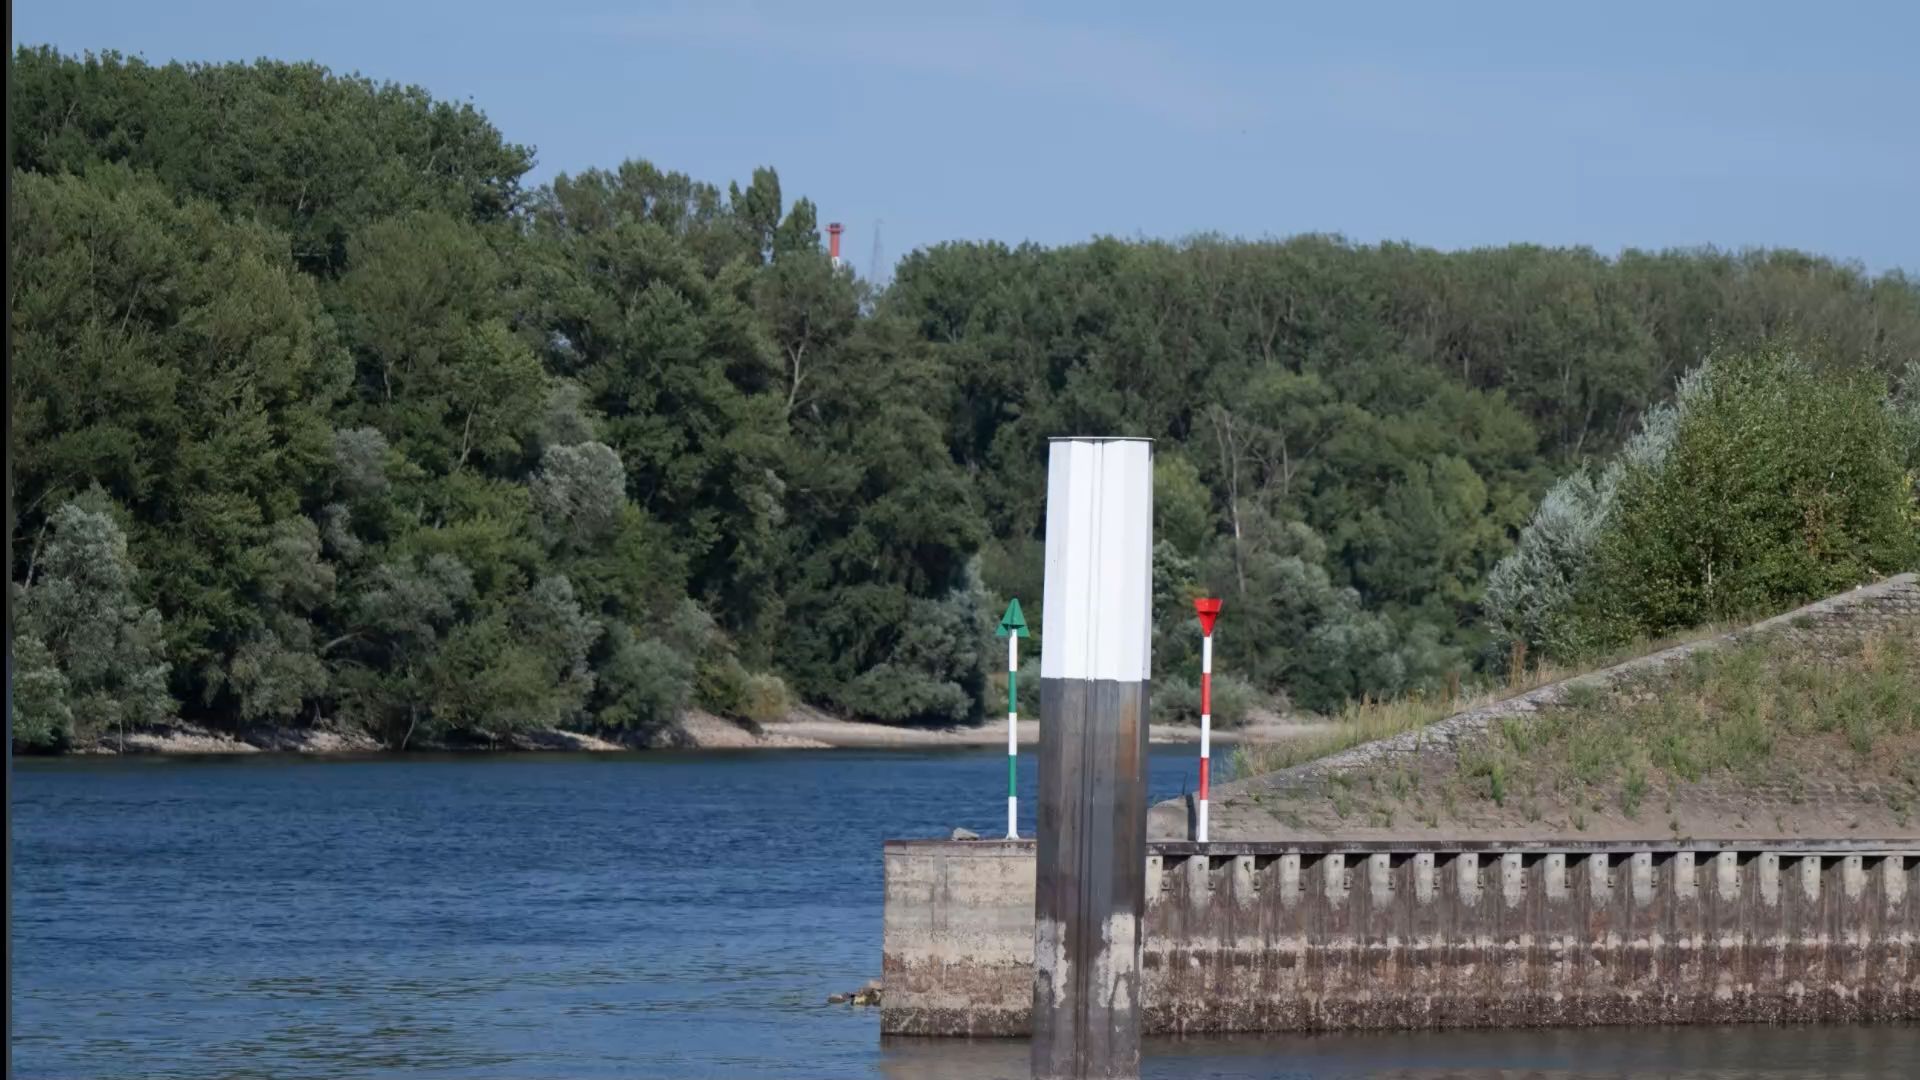 Inaccessible due to low water: The Rettbergsaue in the Rhine